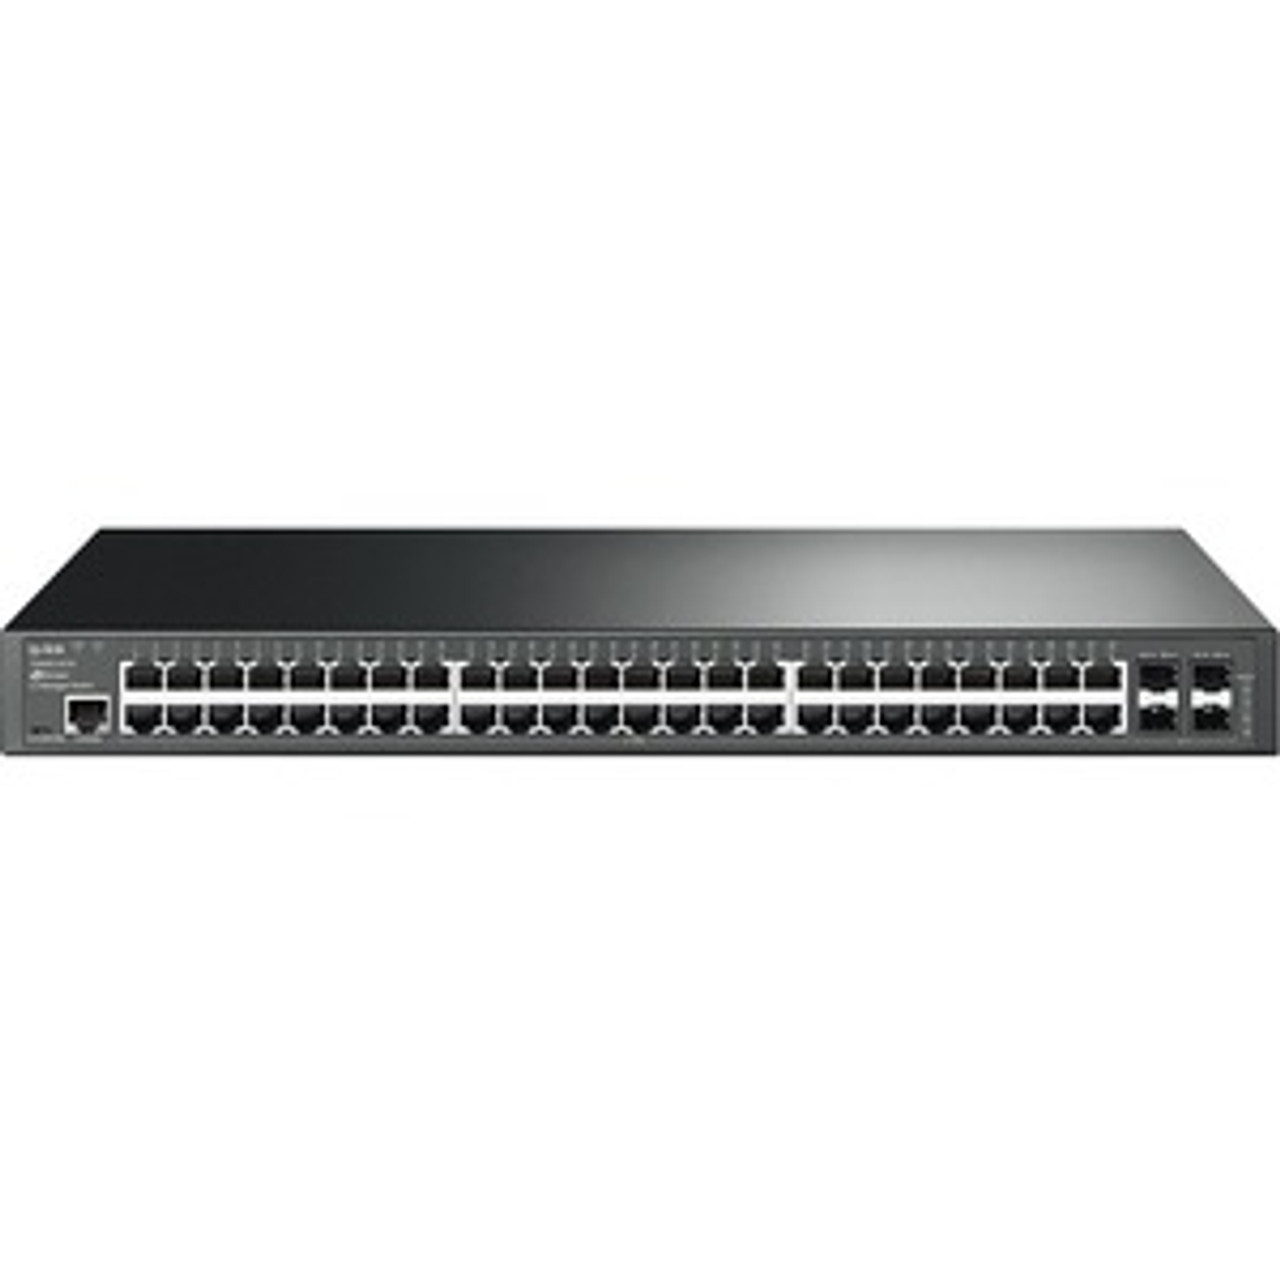 TL-SG3452 TP-Link JetStream 48-Port Gigabit L2 Managed Switch with 4 SFP Slots - 48 Ports - Manageable - 2 Layer Supported - Modular - 4 SFP Slots - Optical